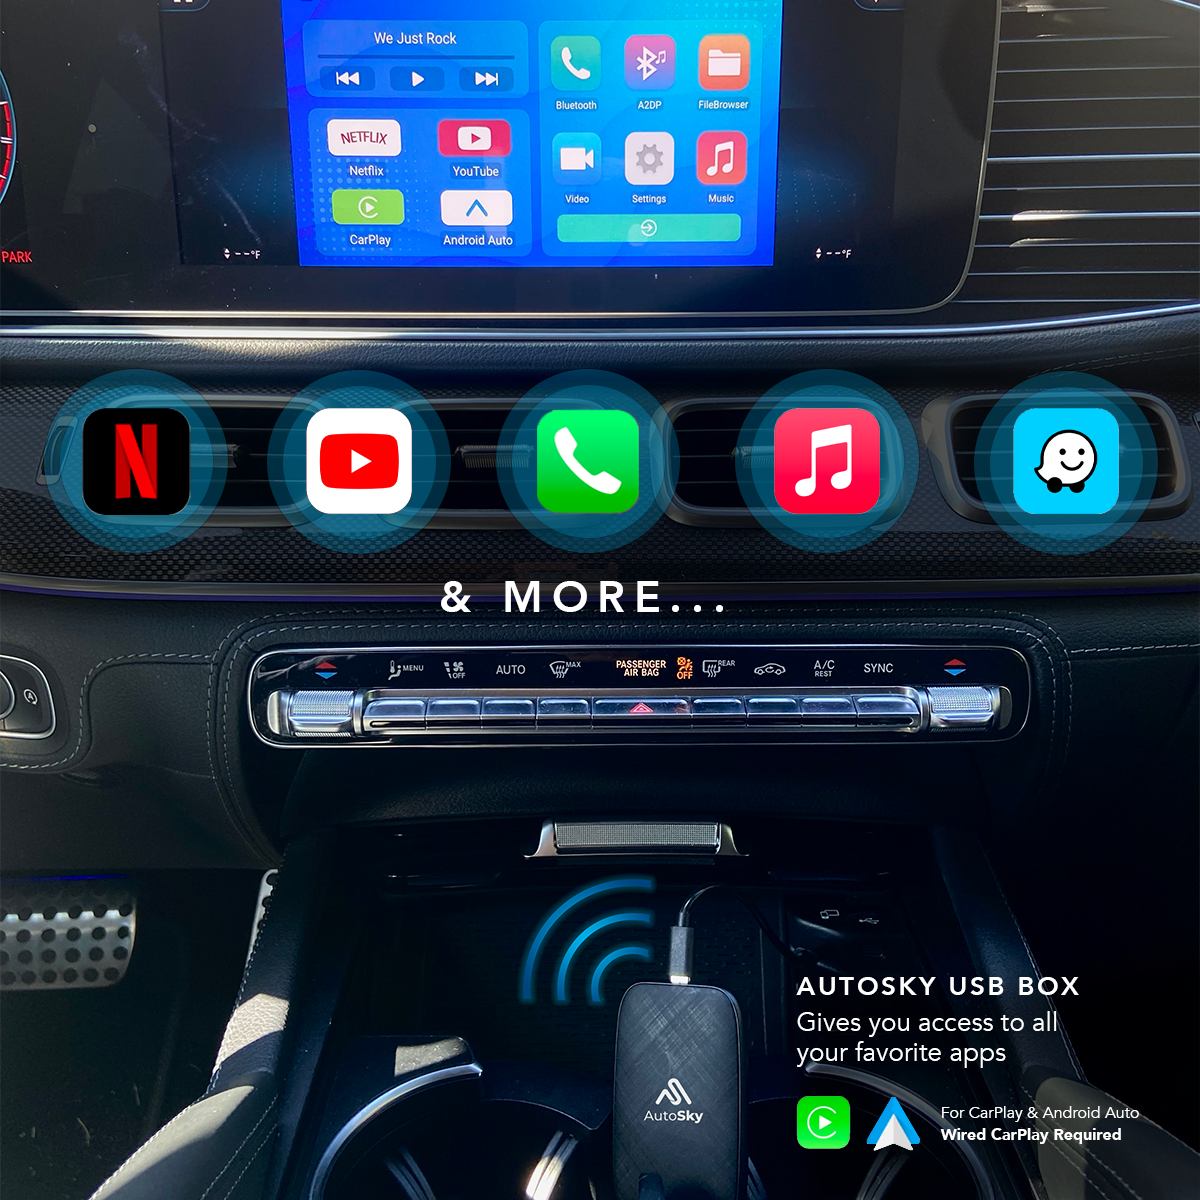 Features of AutoSky Wireless CarPlay and Android Auto AI Box Lite - Supports Netflix YouTube and Gmail